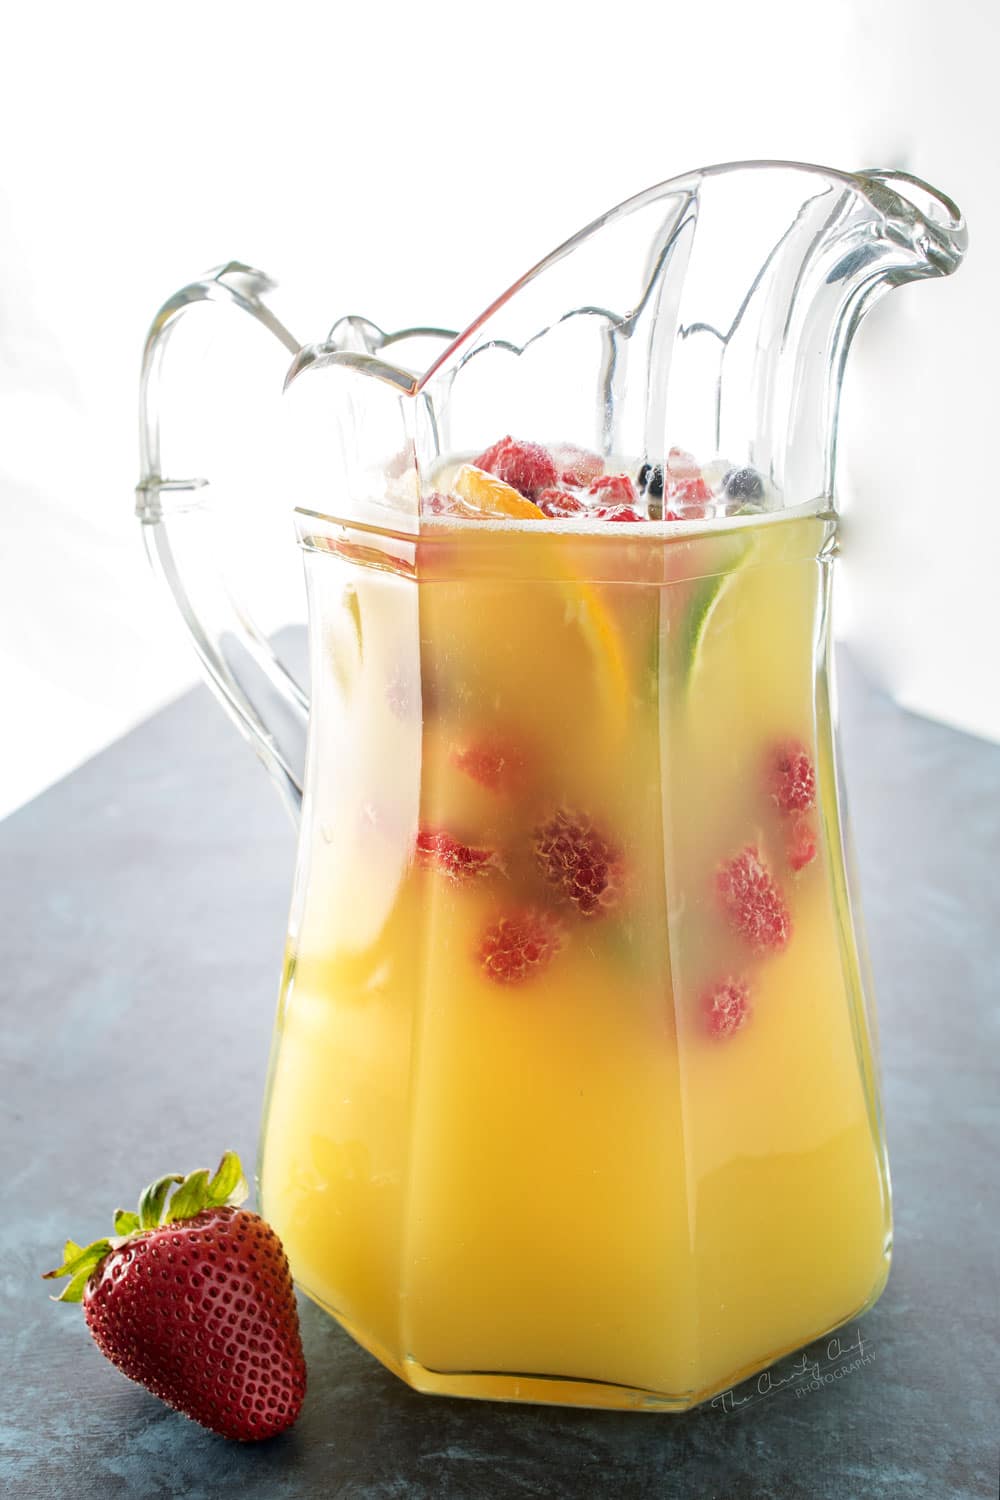 http://www.thechunkychef.com/wp-content/uploads/2016/06/Summer-Pineapple-Punch-4.jpg